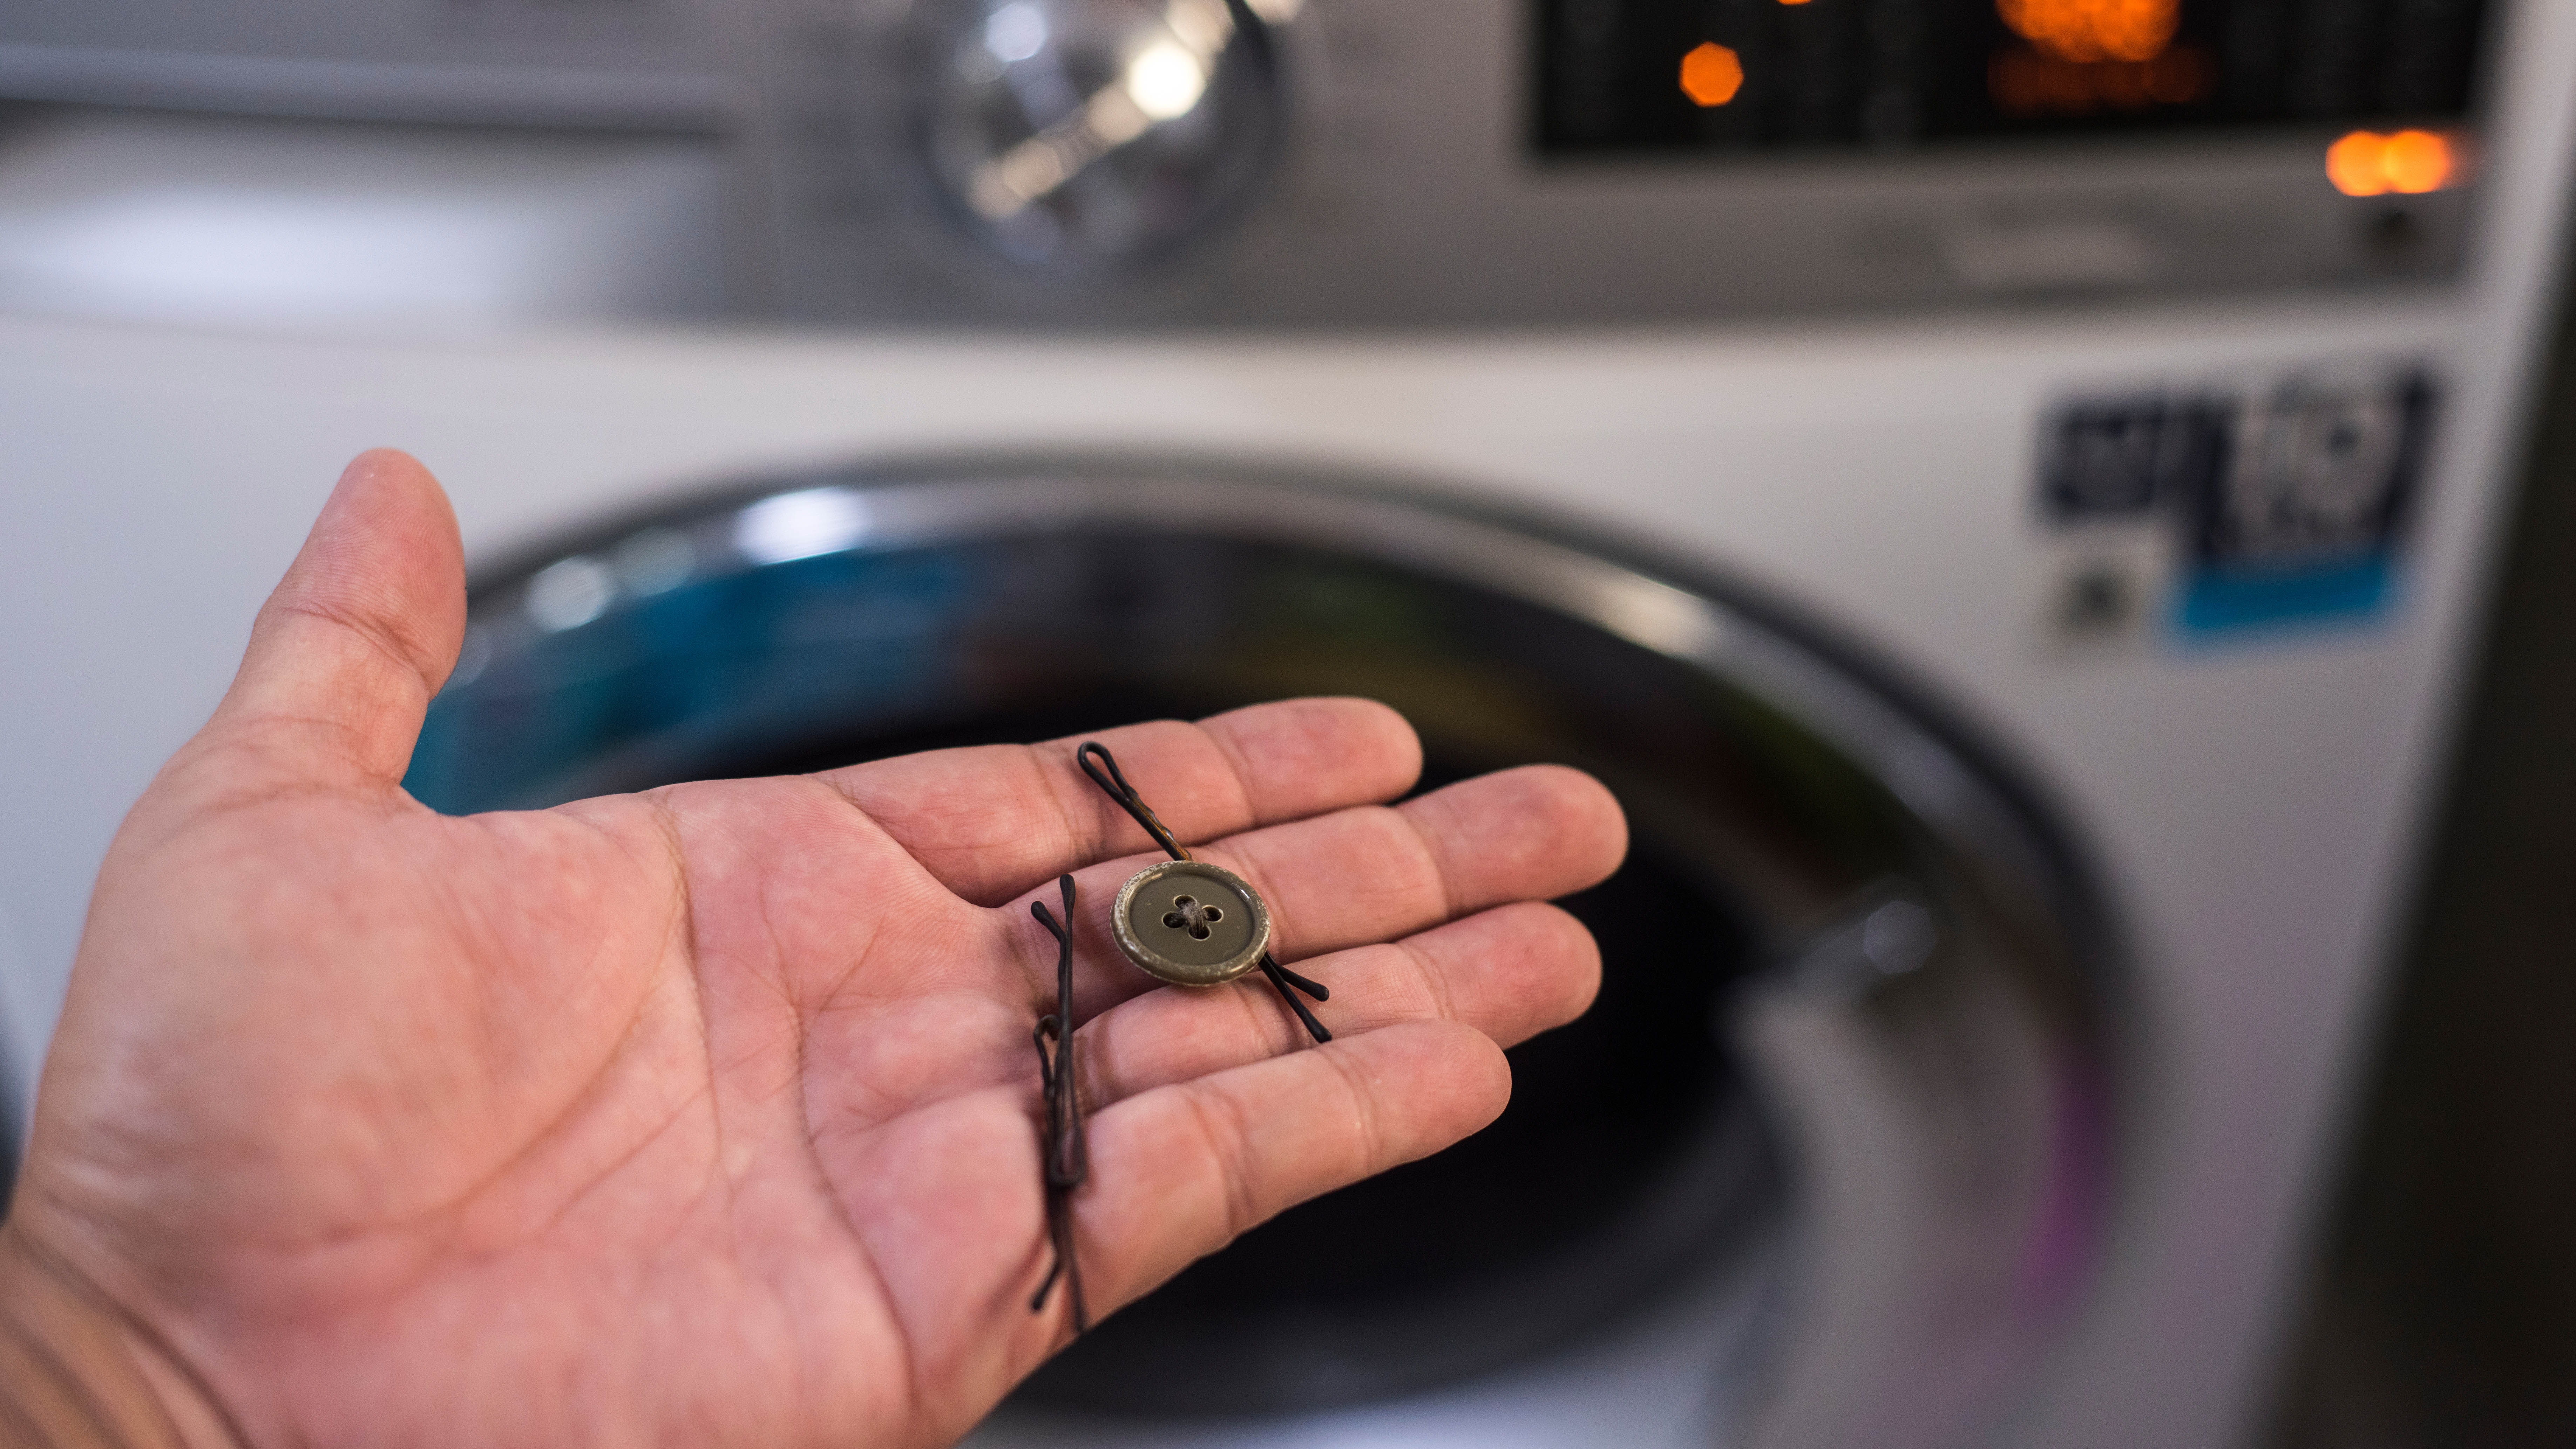 Someone holding a hairpin and button in front of the washing machine